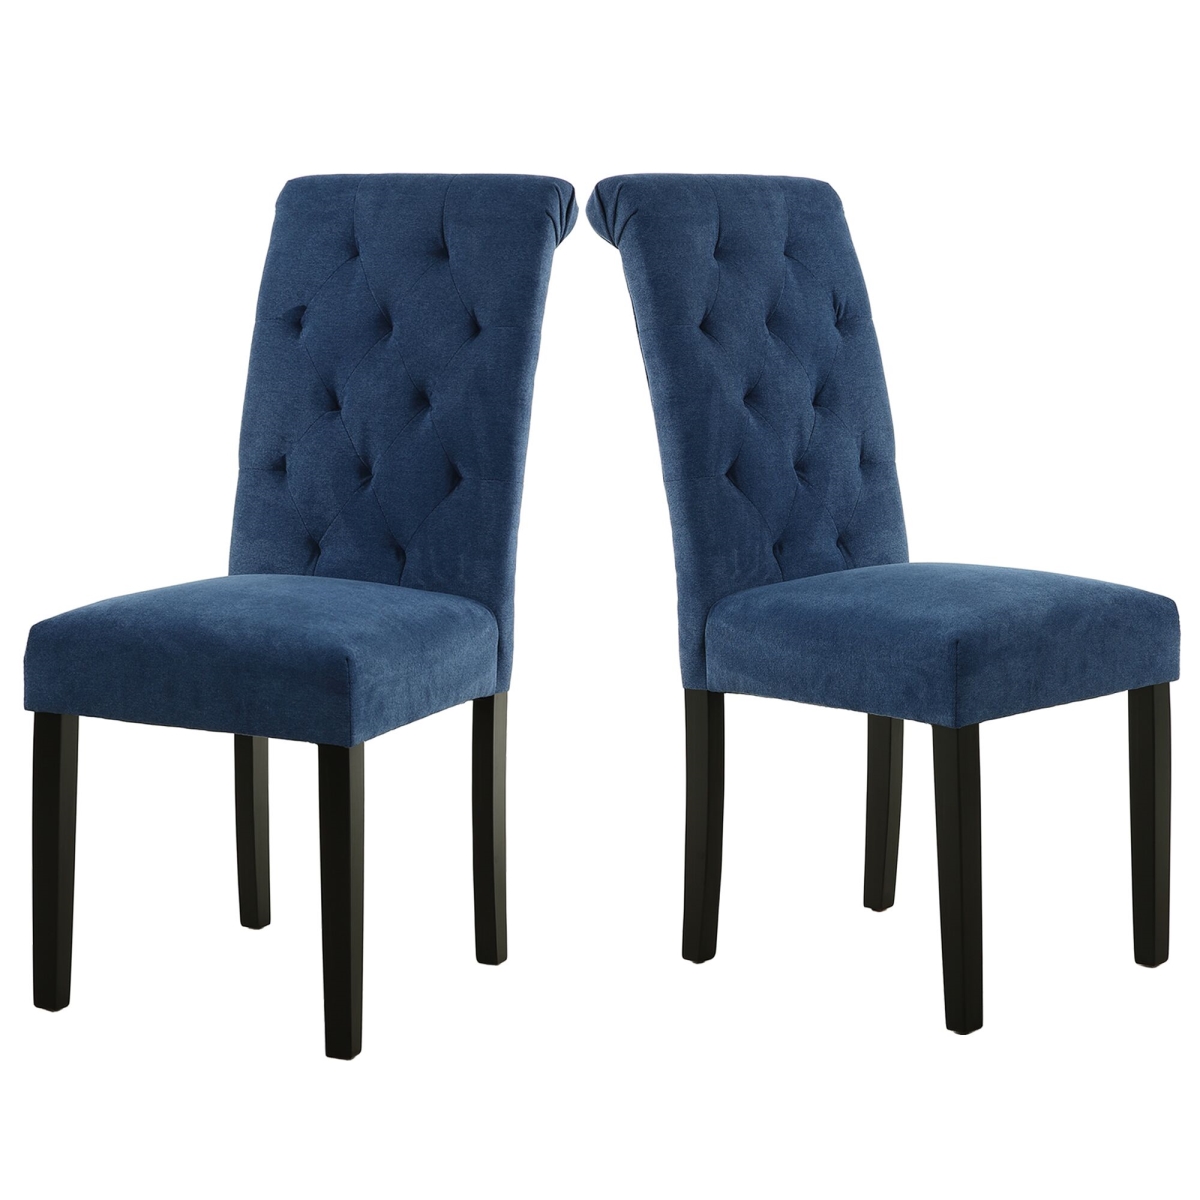 Ow-lw8126s-blue High Back Diamond-pattern Tufting Fabric Upholstered Dining Chairs, Blue - Set Of 2